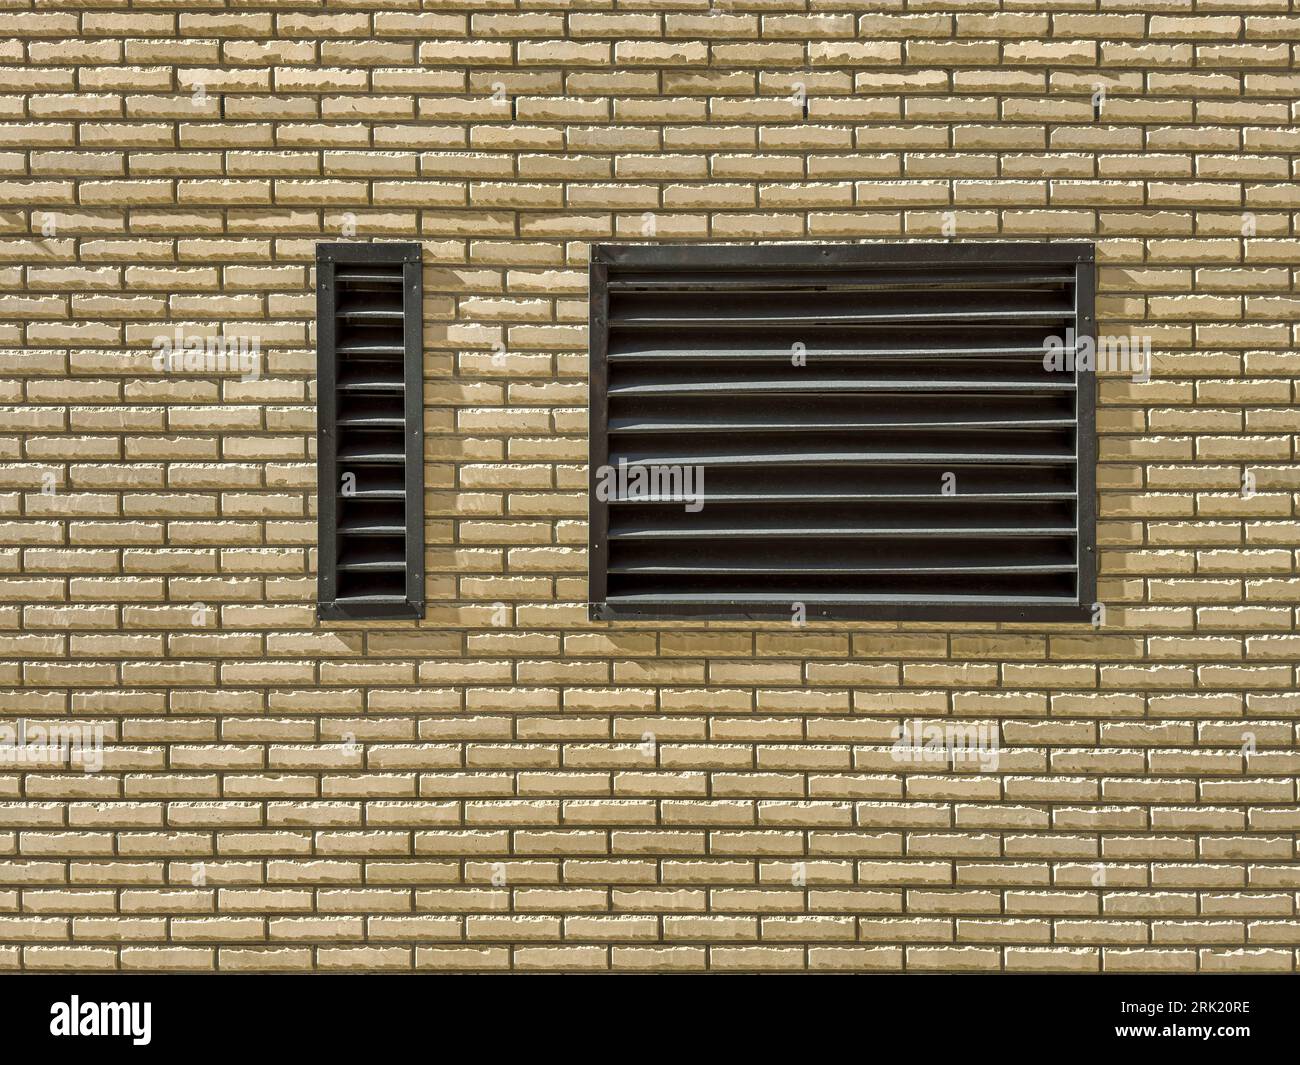 metal lattice of technical ventilation window on brick wall of renovated industrial building. Stock Photo